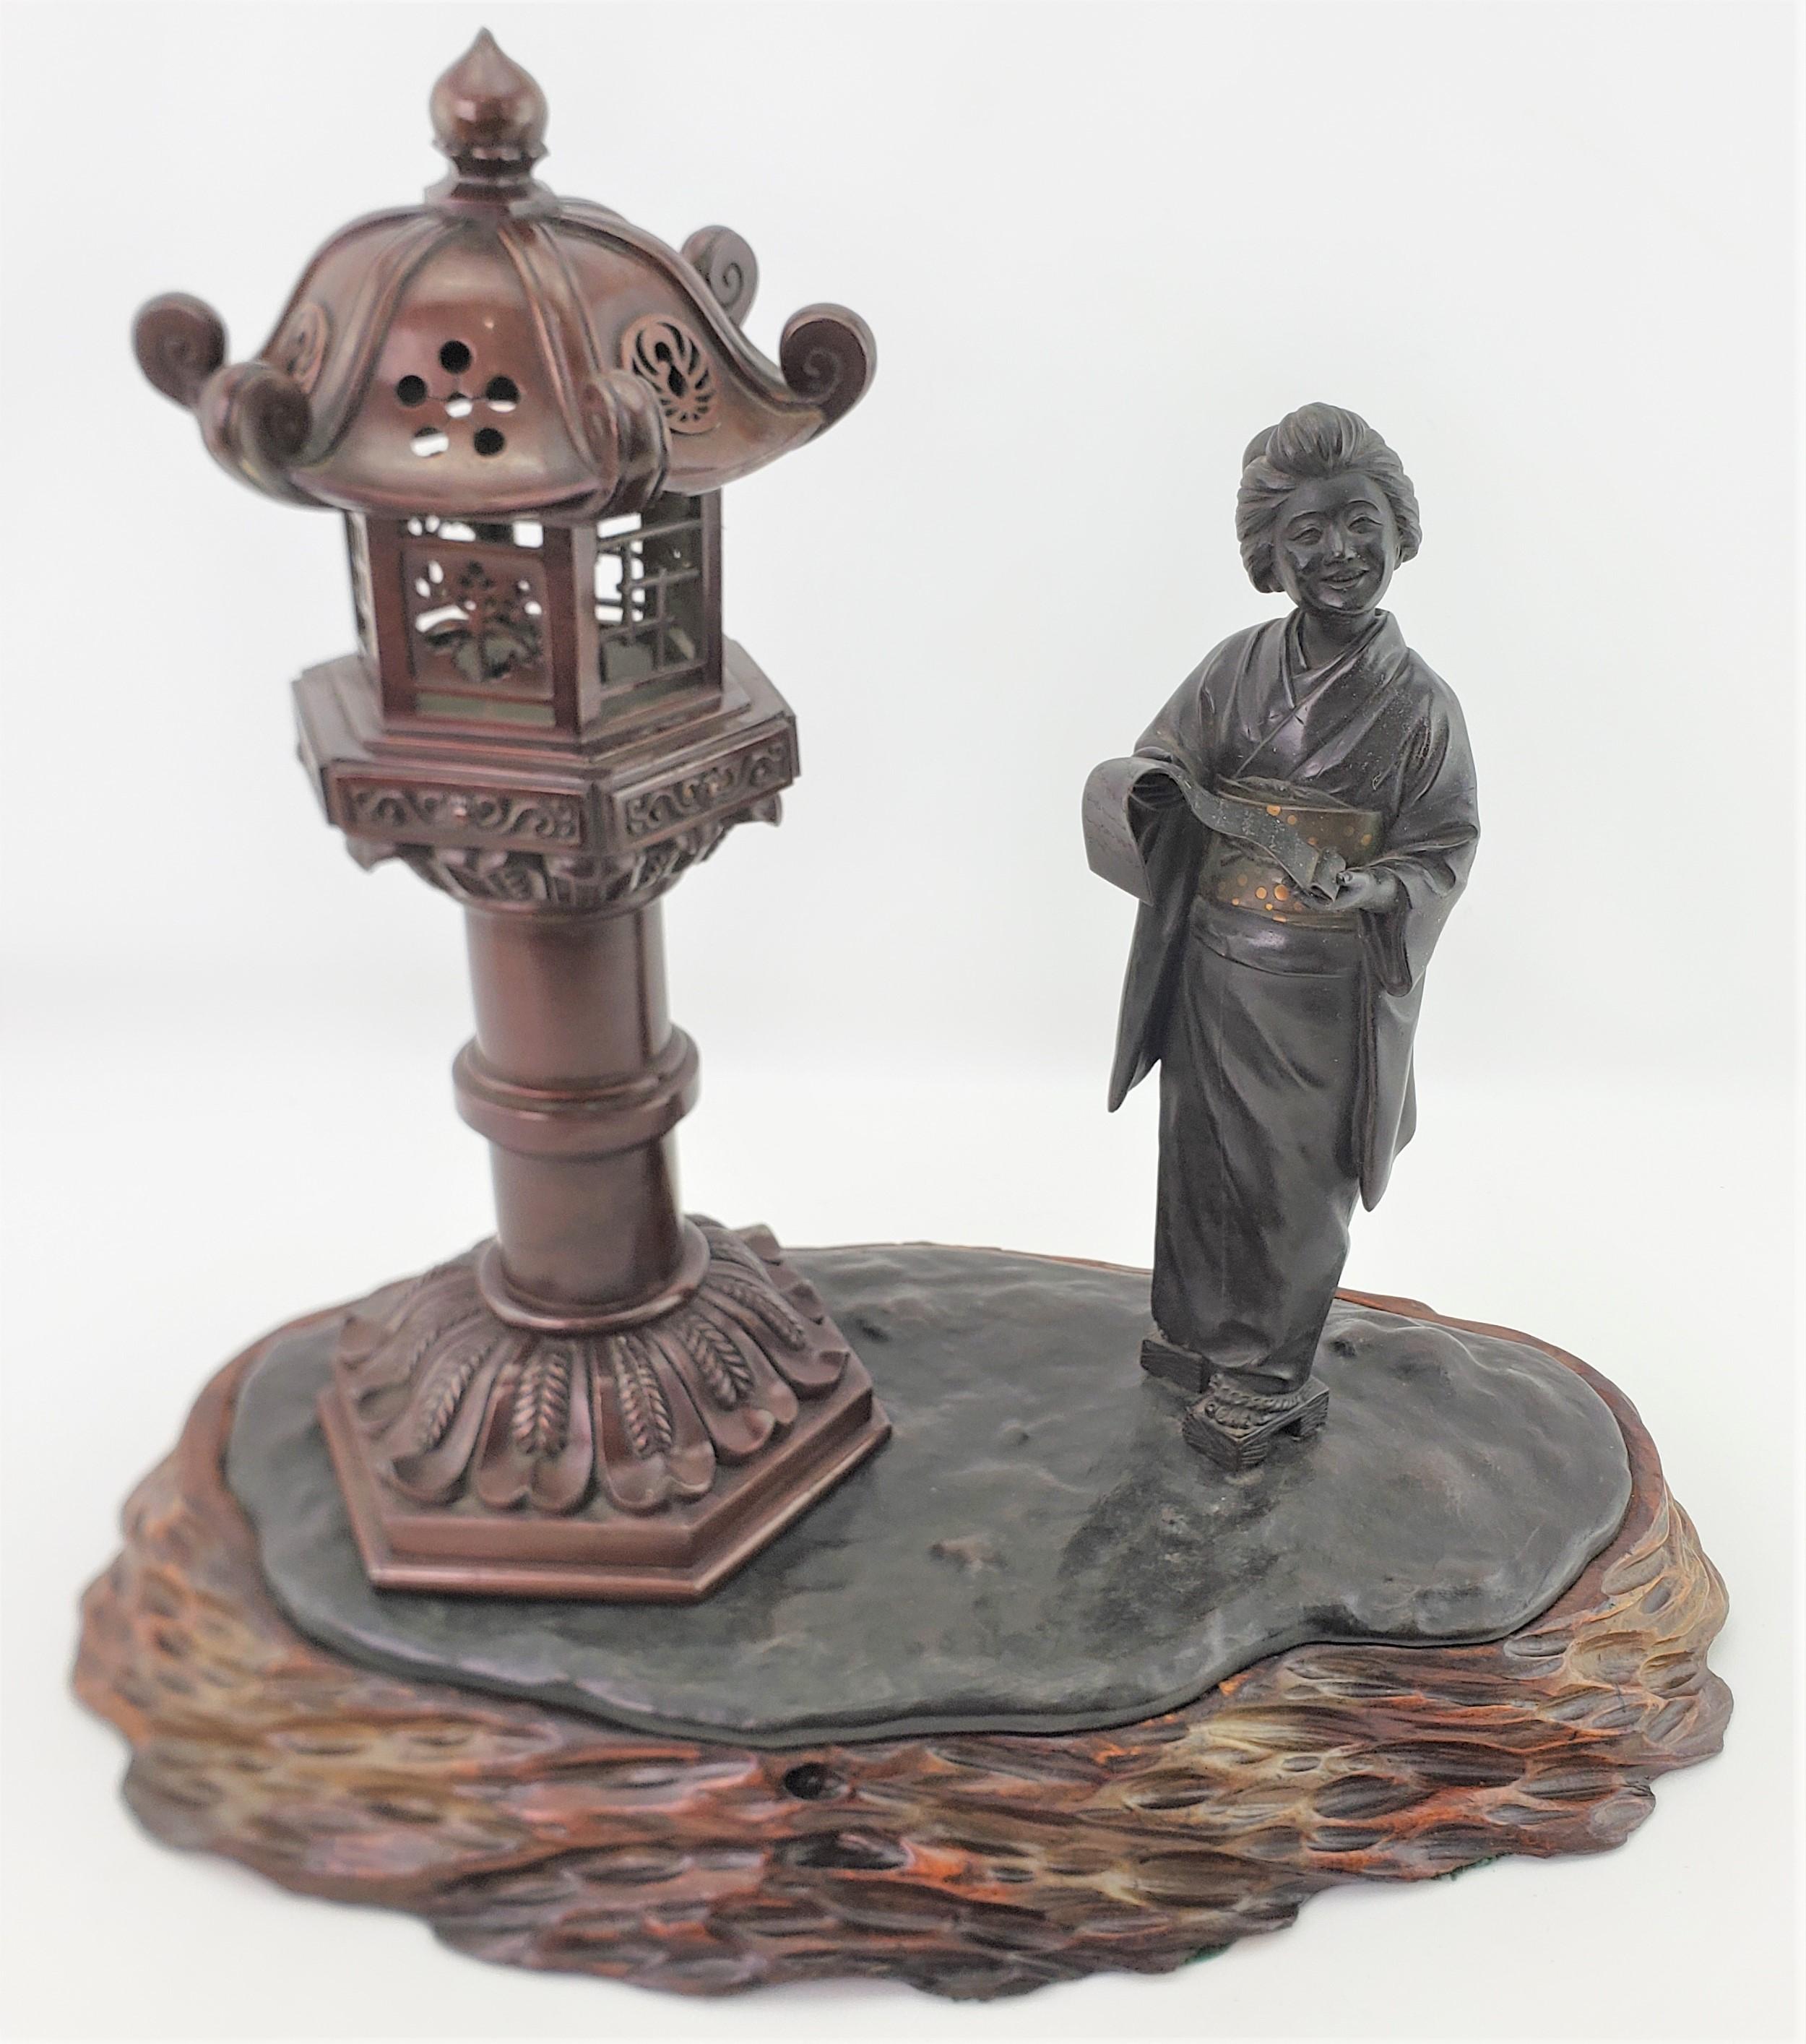 This large antique Meiji period Japanese patinated and polychromed bronze is signed by an unknown artist and presumed to have been made in approximately 1880 in the period Meiji style. The bronze is extremely detailed in the casting and depicts a